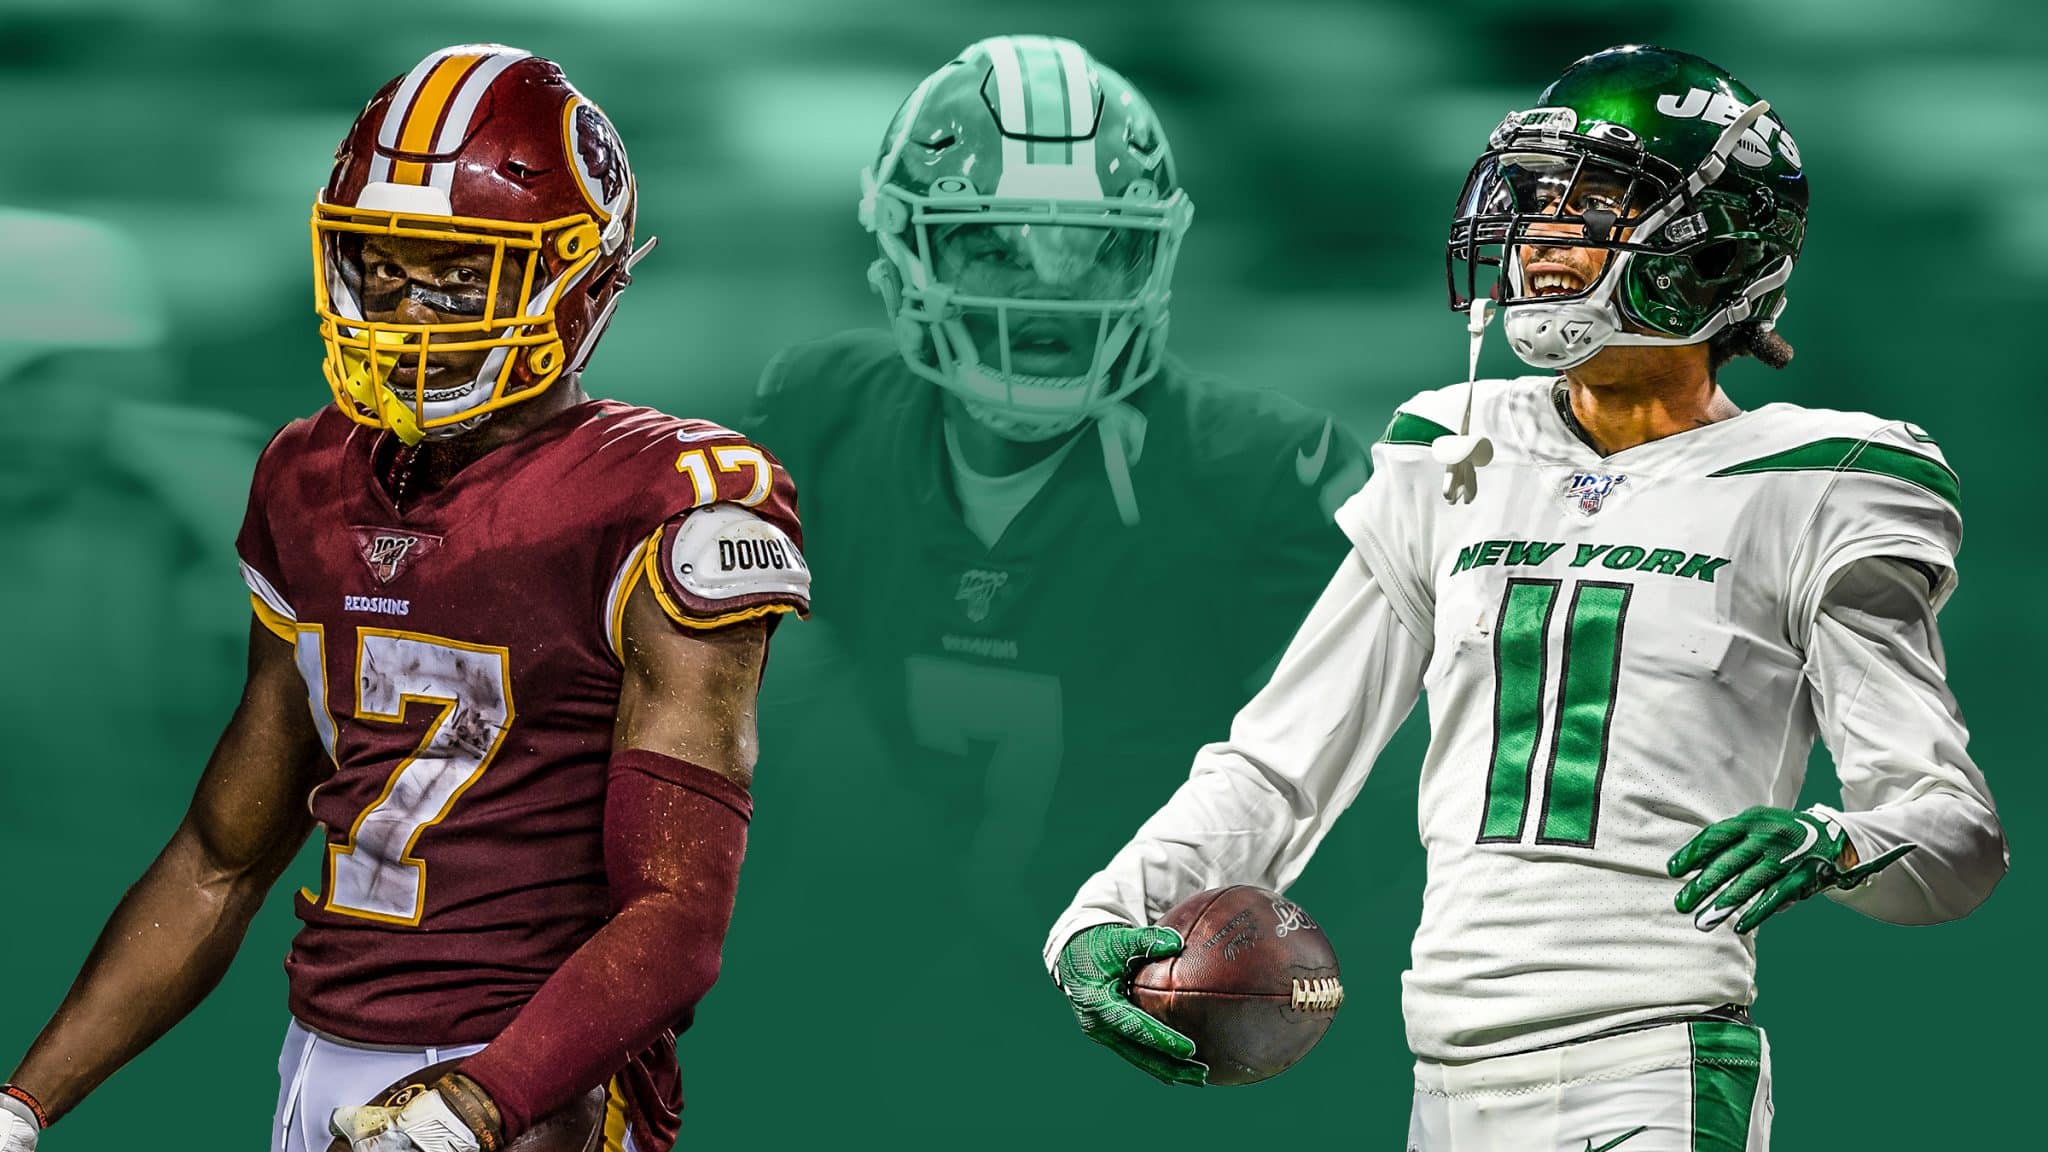 Terry McLaurin, Robby Anderson, Dwayne Haskins